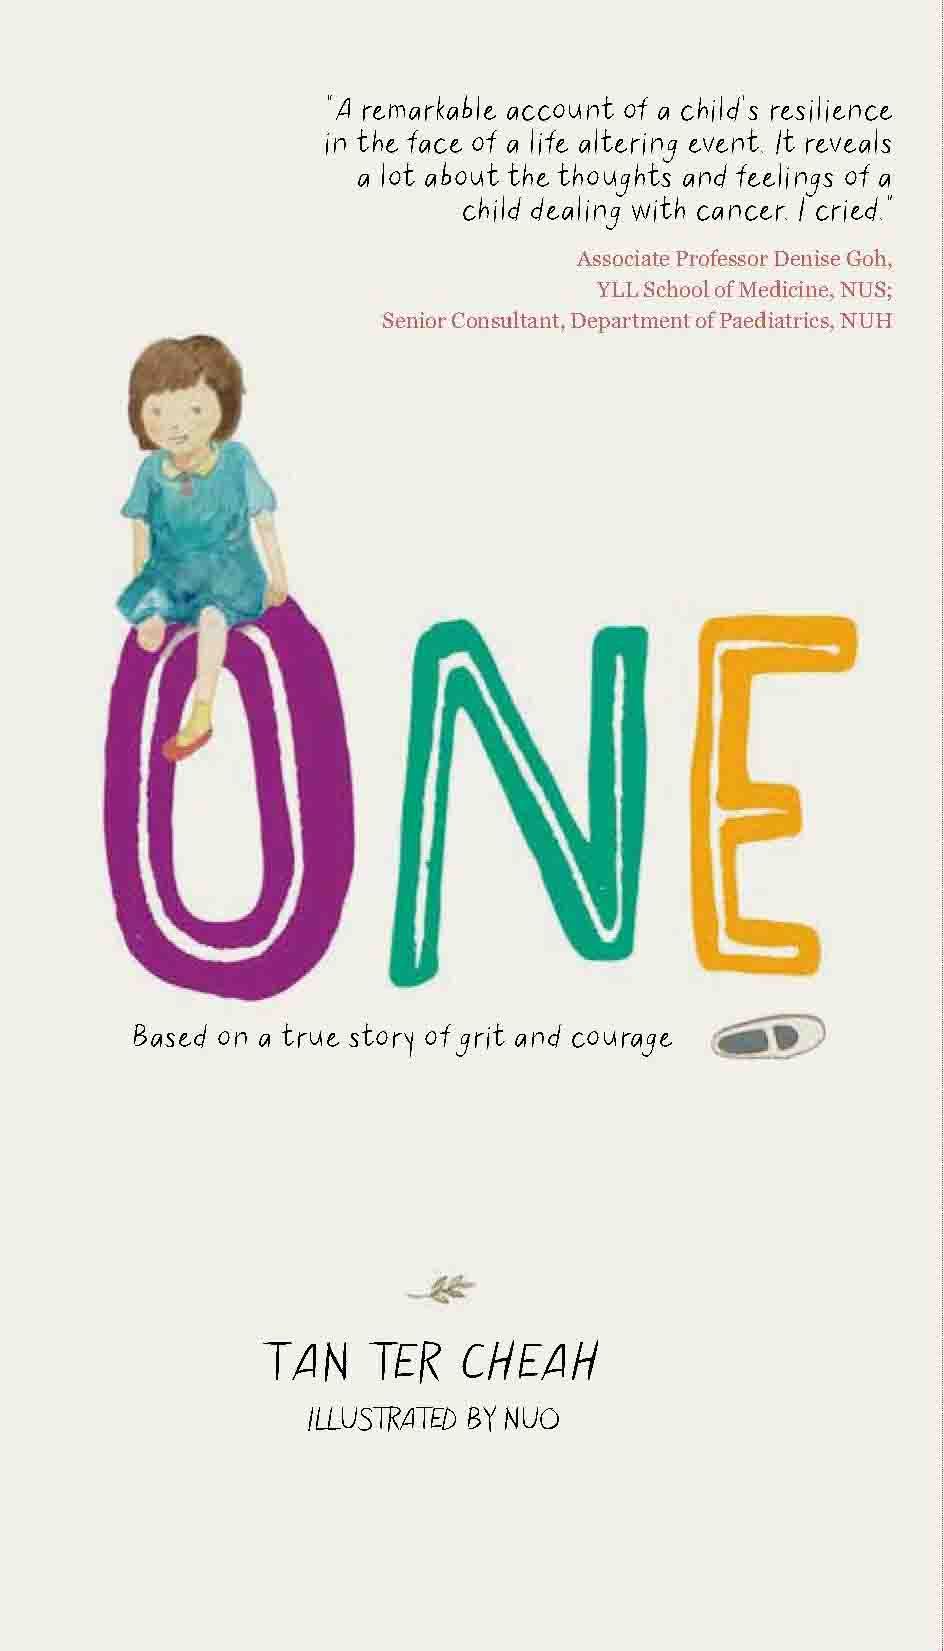 One: Based on a True Story of Grit and Courage